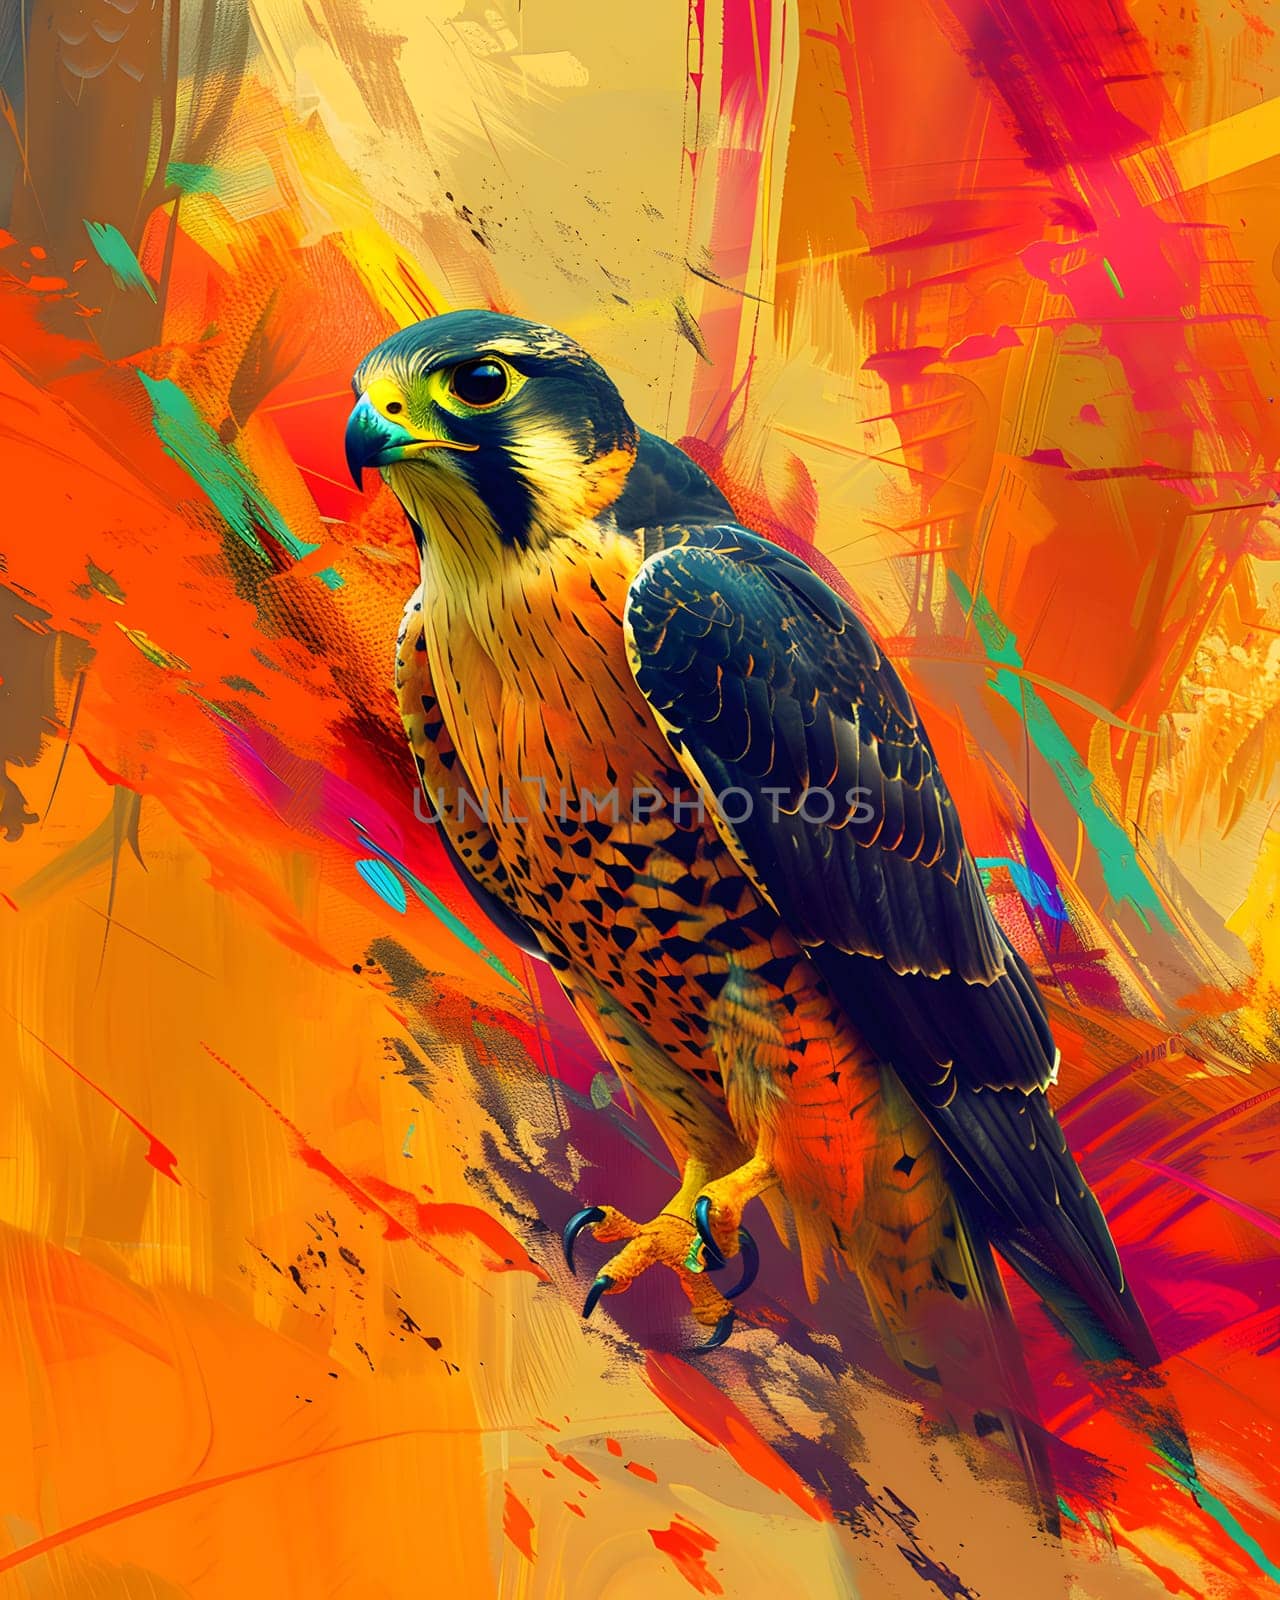 A stunning painting of a bird from the Accipitridae family, with vibrant orange feathers and a sharp beak, set against a colorful background, showcasing the artists skill and love for nature